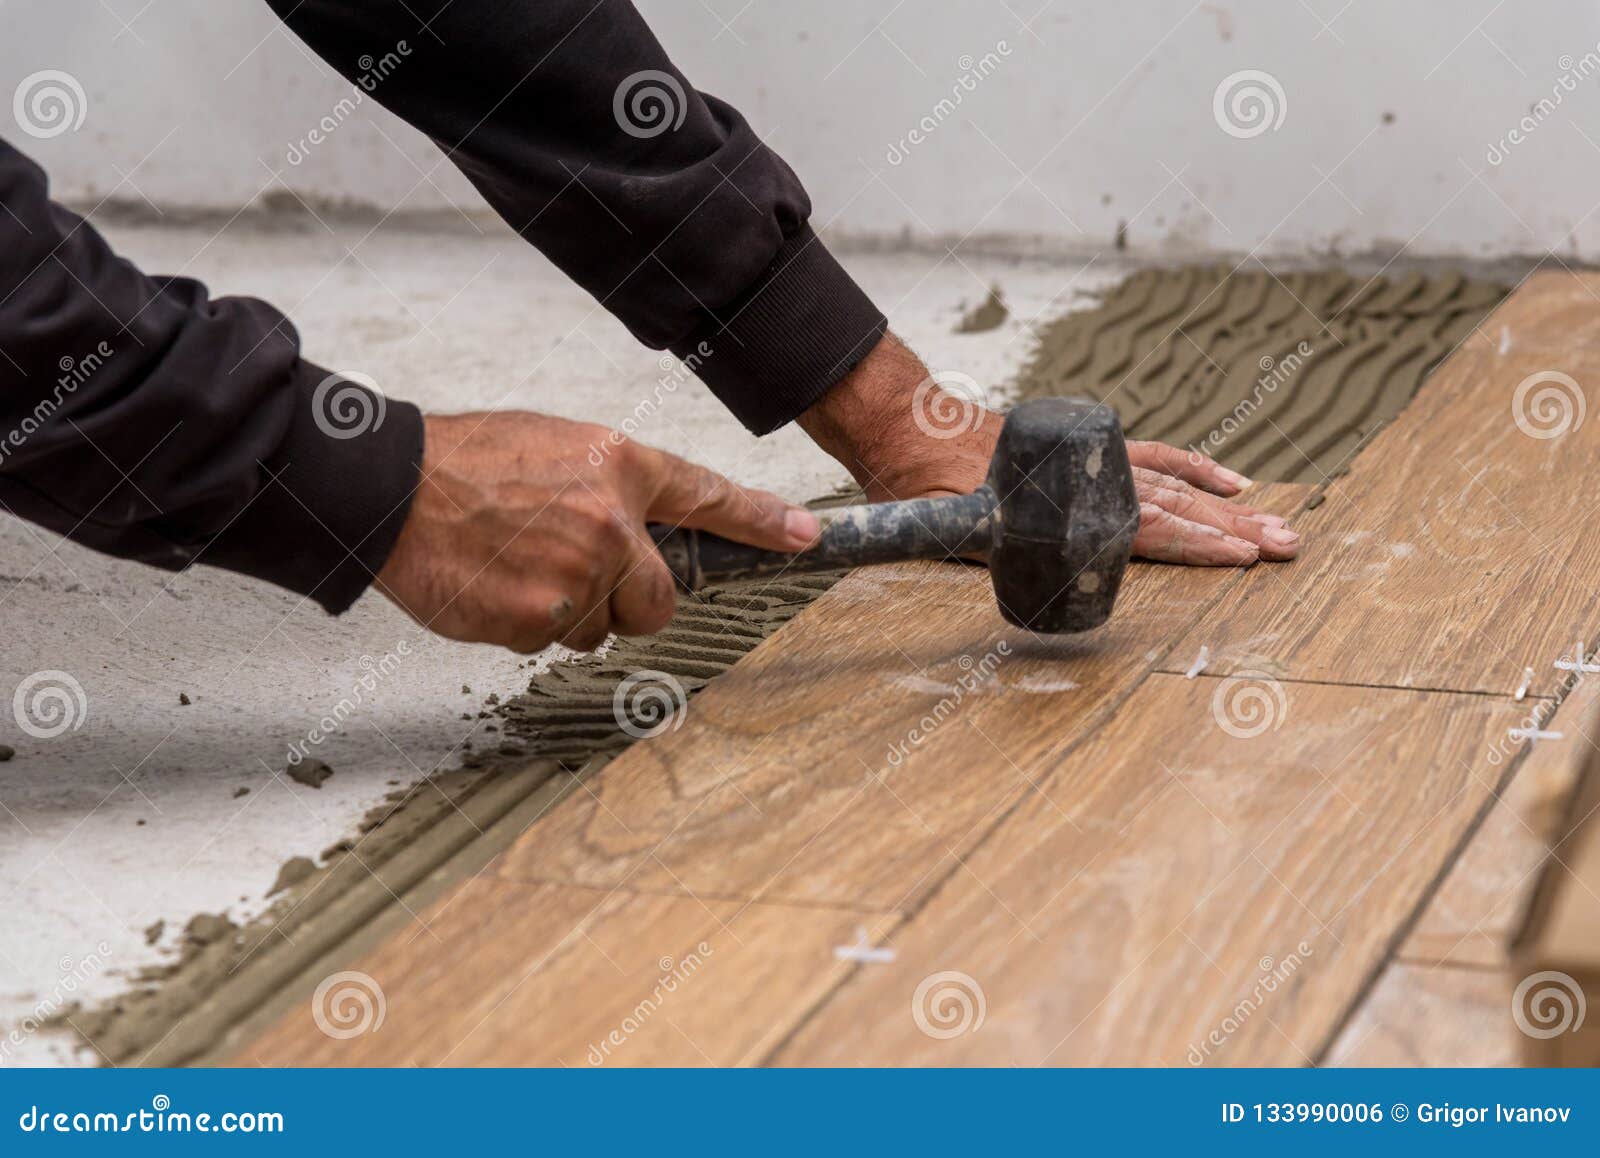 Worker Placing Ceramic Floor Tiles On Adhesive Surface Leveling